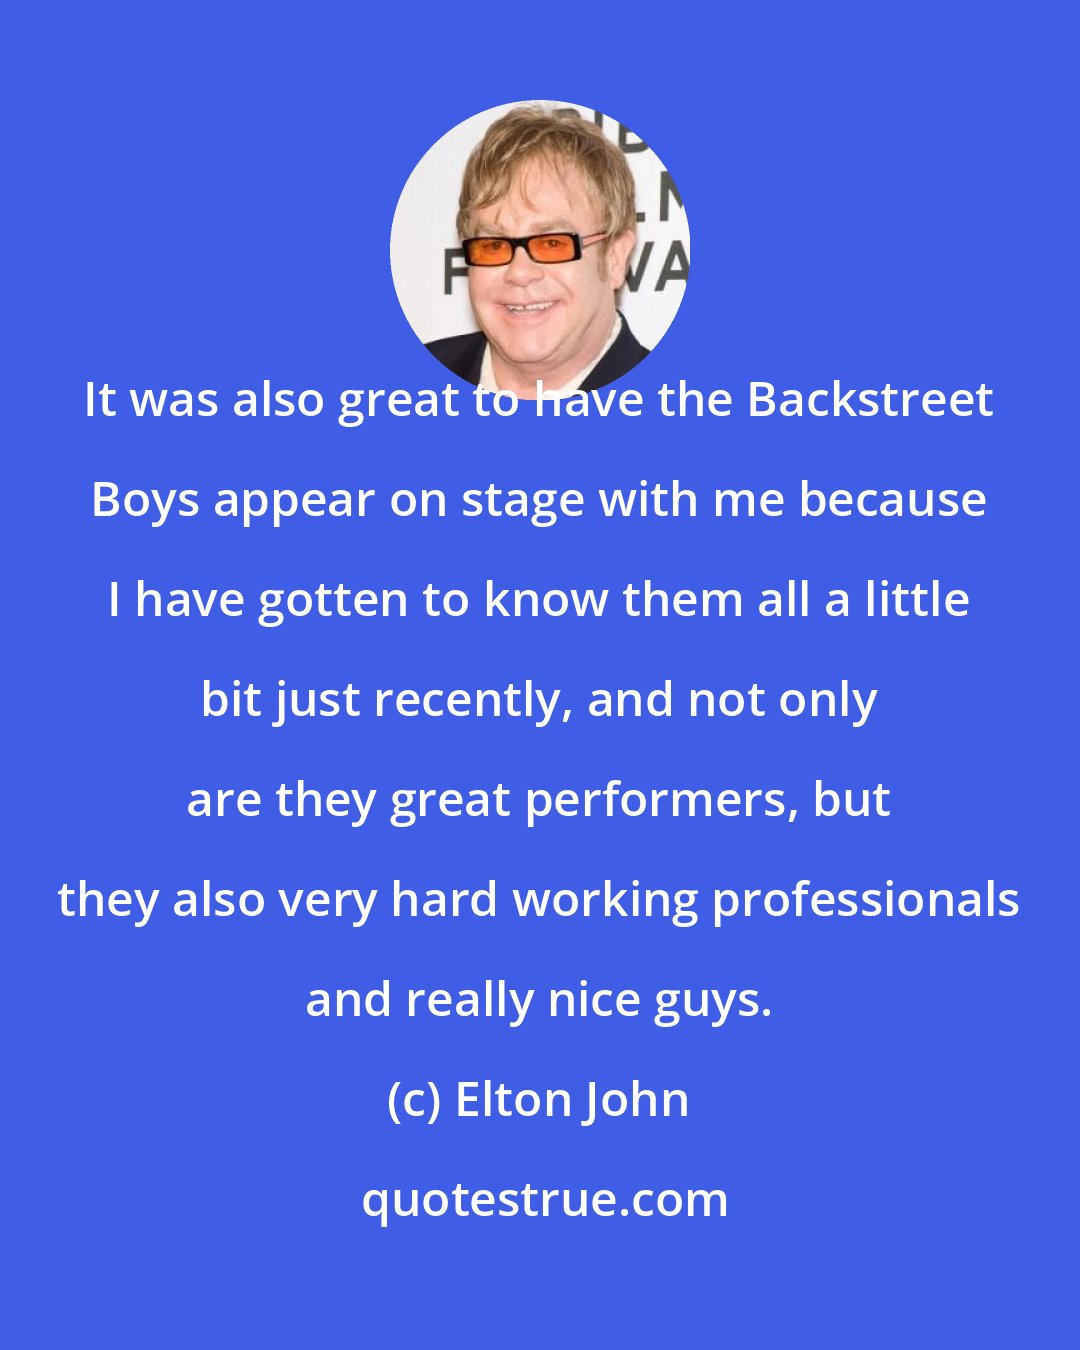 Elton John: It was also great to have the Backstreet Boys appear on stage with me because I have gotten to know them all a little bit just recently, and not only are they great performers, but they also very hard working professionals and really nice guys.